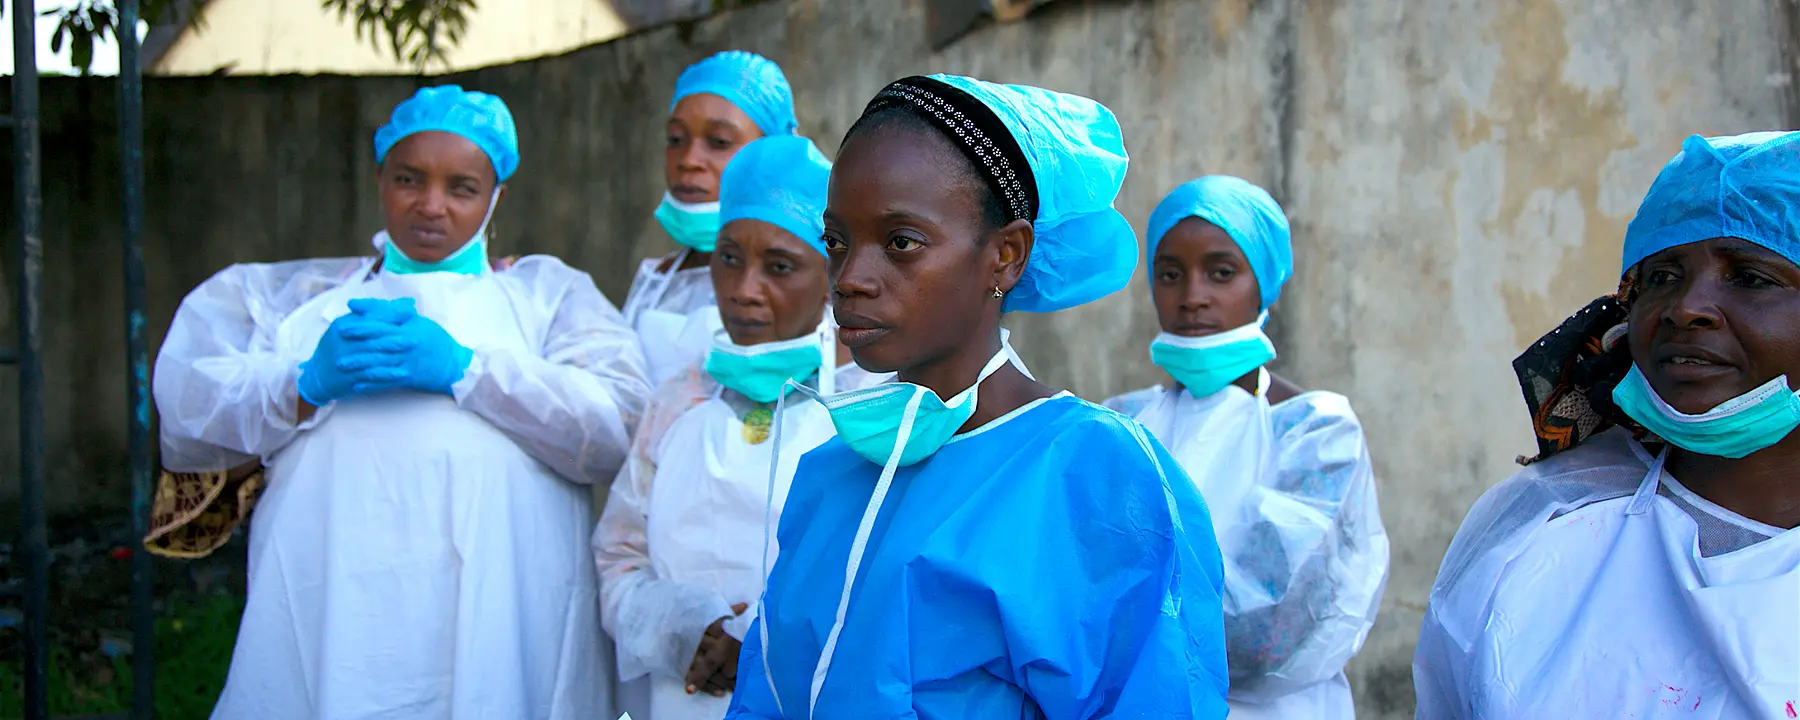 Health care workers in Guinea receive training about the Ebola virus.